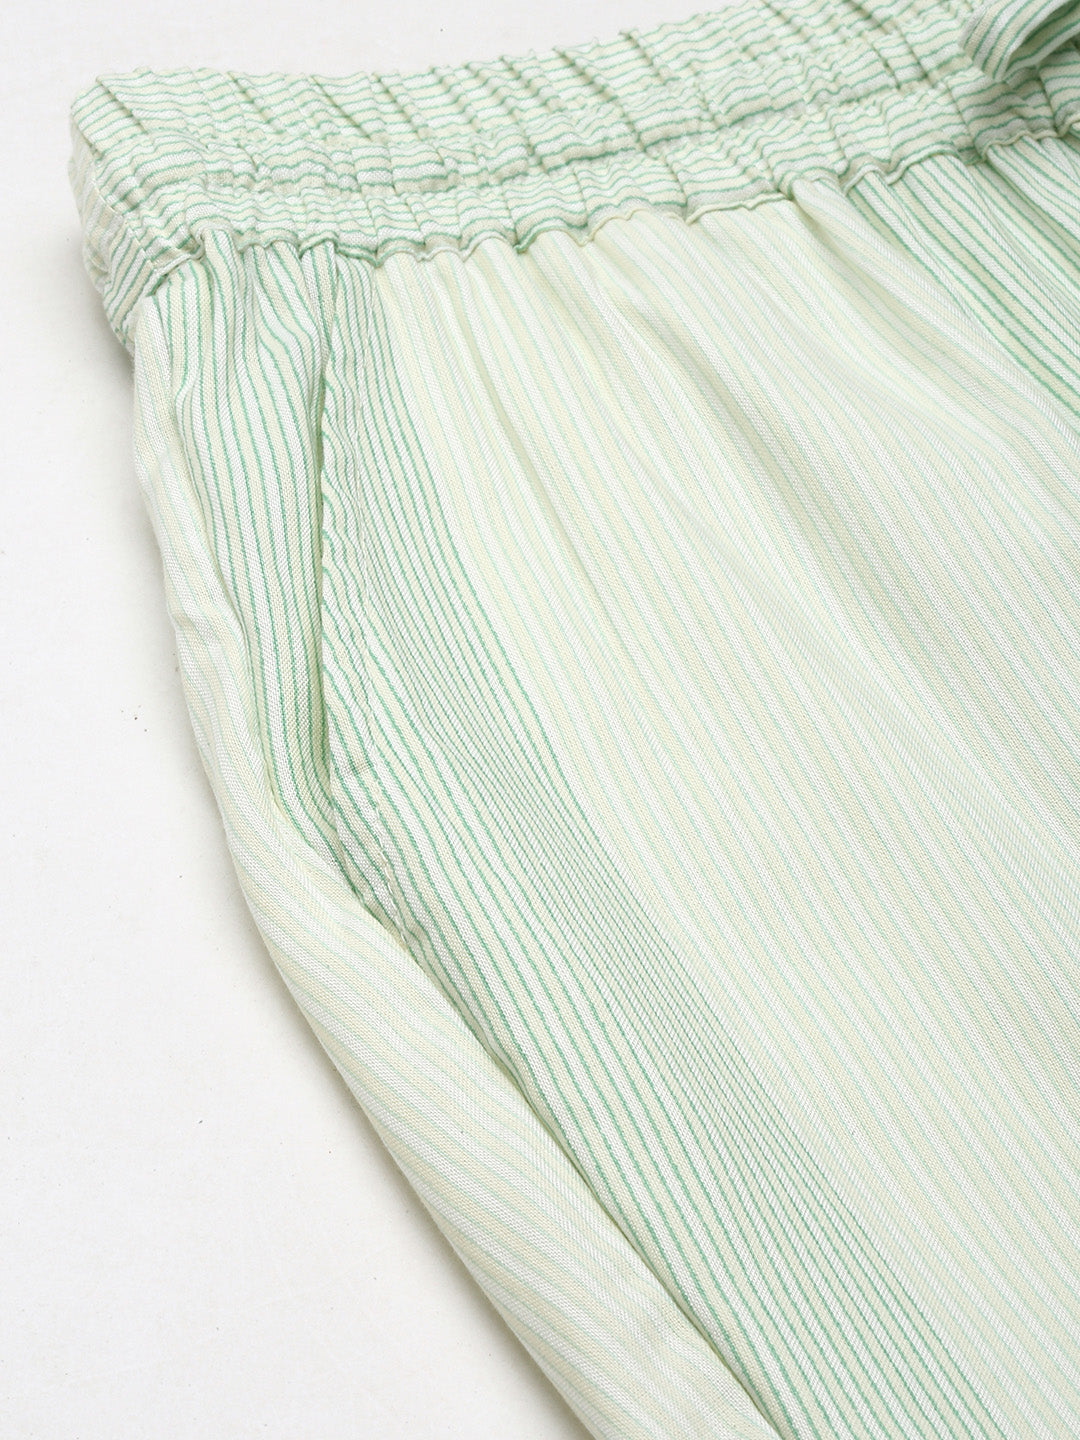 Beige & Green Stiped Pencil Pant